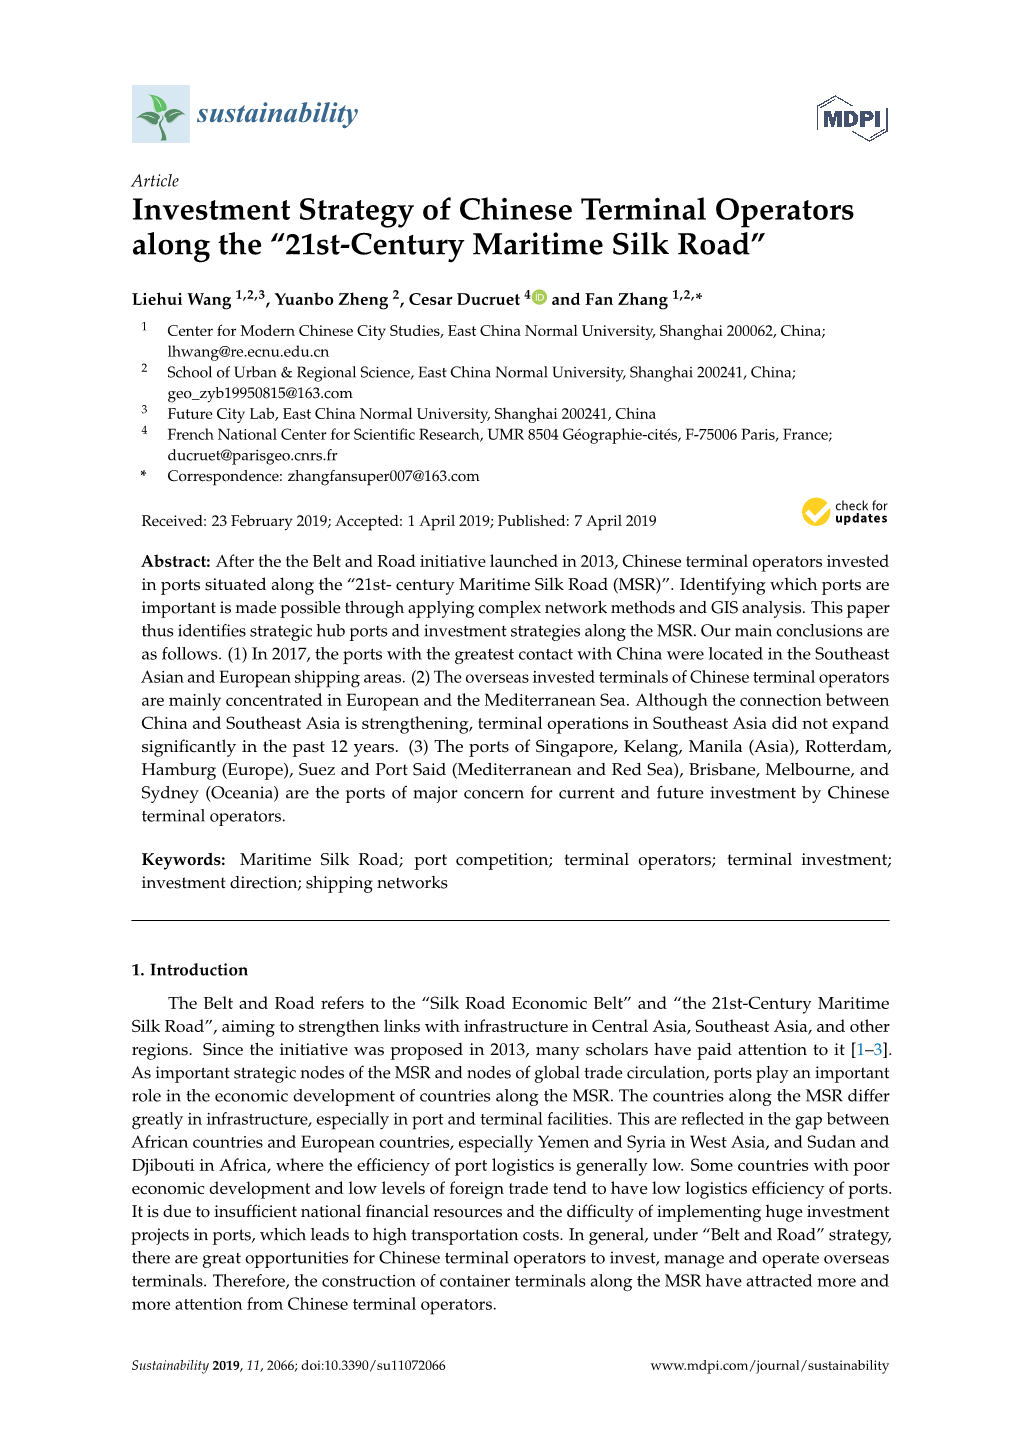 Investment Strategy of Chinese Terminal Operators Along the “21St-Century Maritime Silk Road”